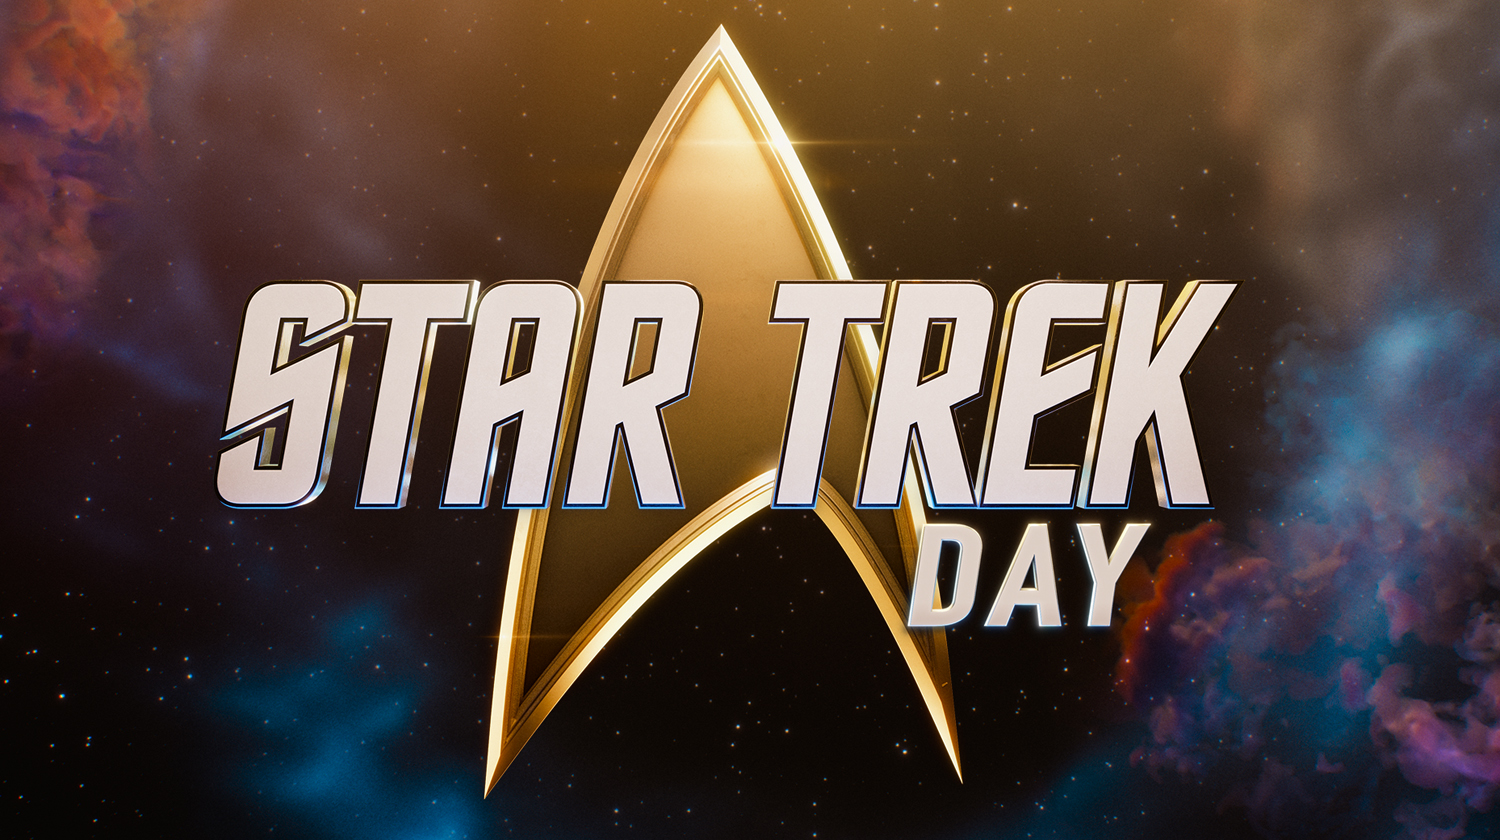 'Star Trek' Day offers a feast for fans, including news, interviews and more